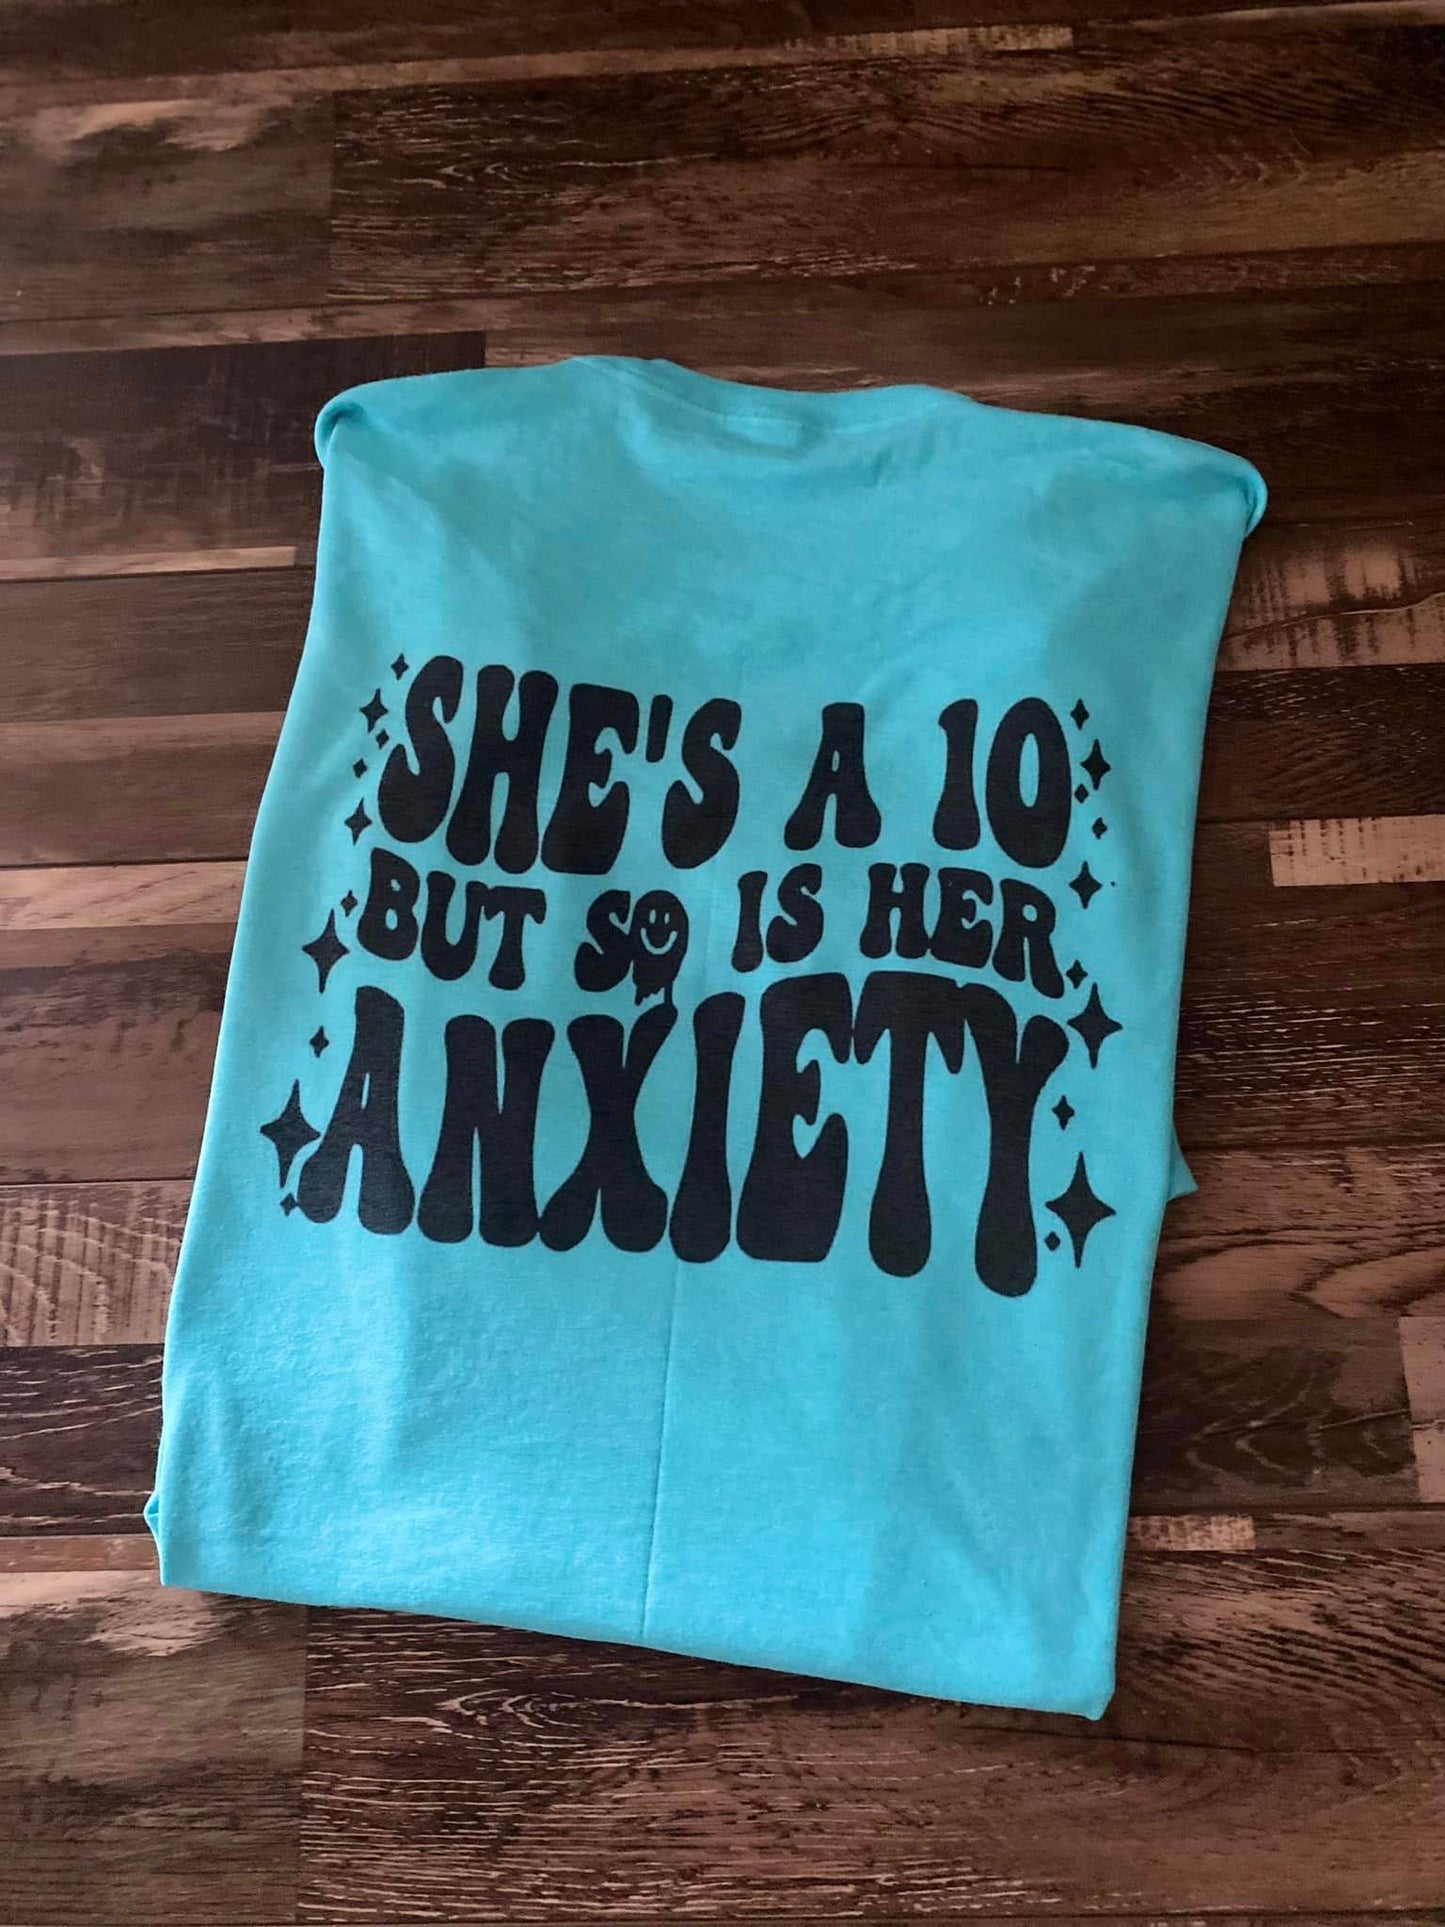 She's a 10 but so is her anxiety tee